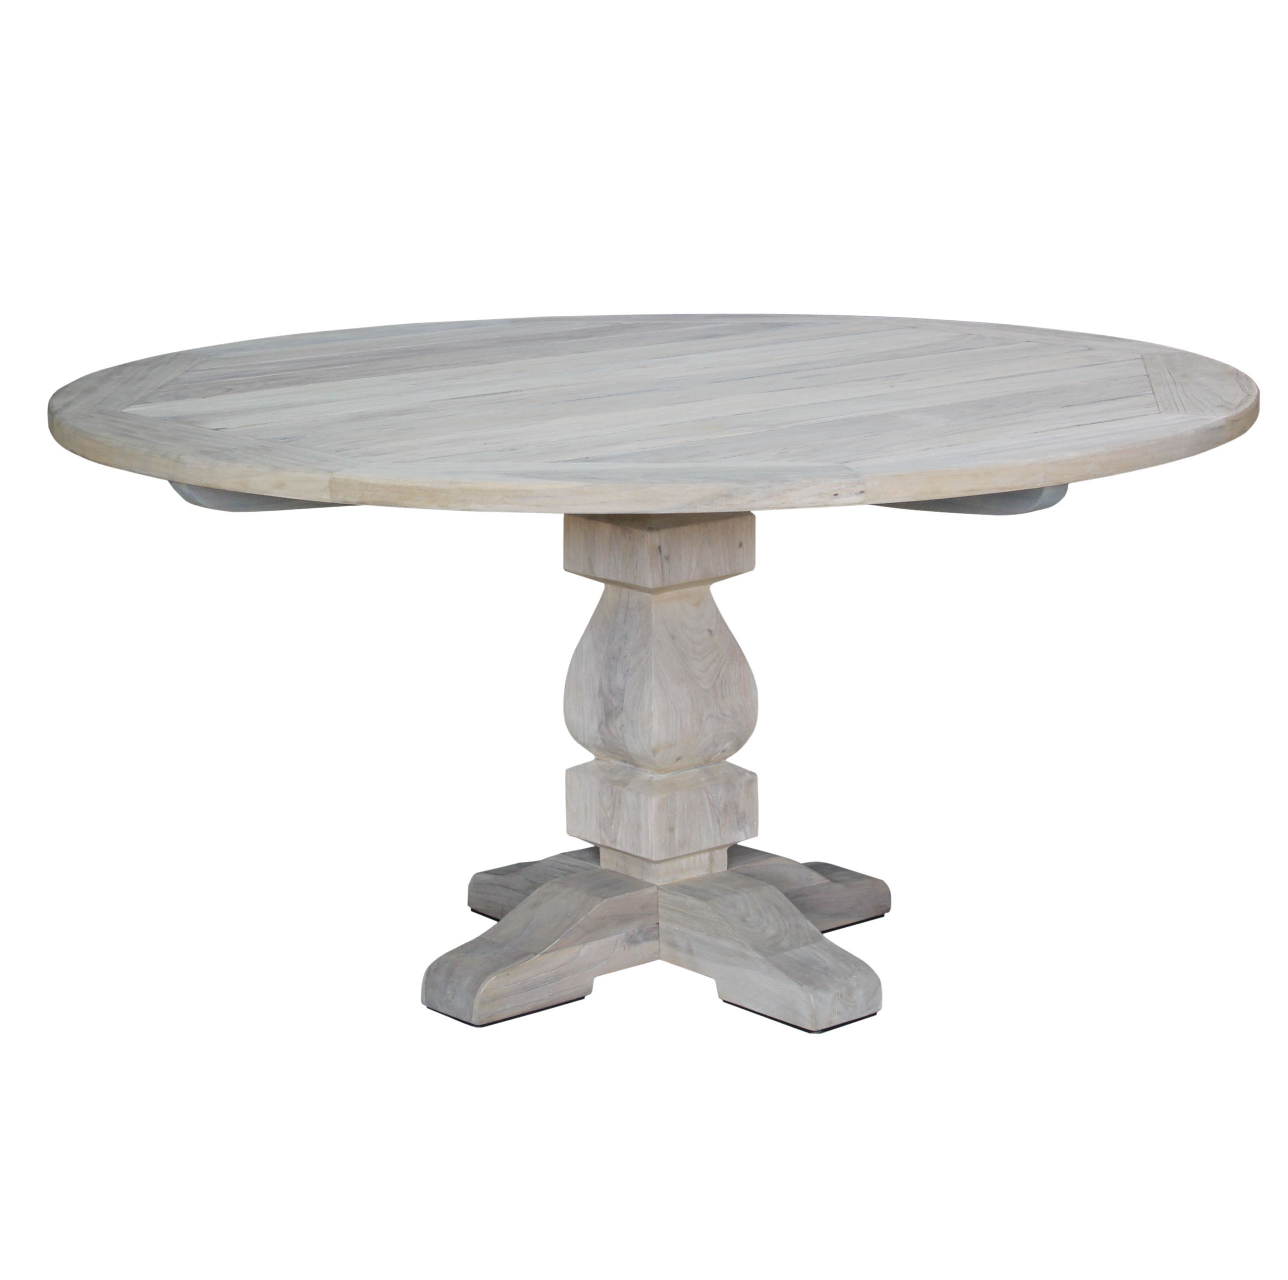 Artwood Vintage Round Outdoor Dining Table